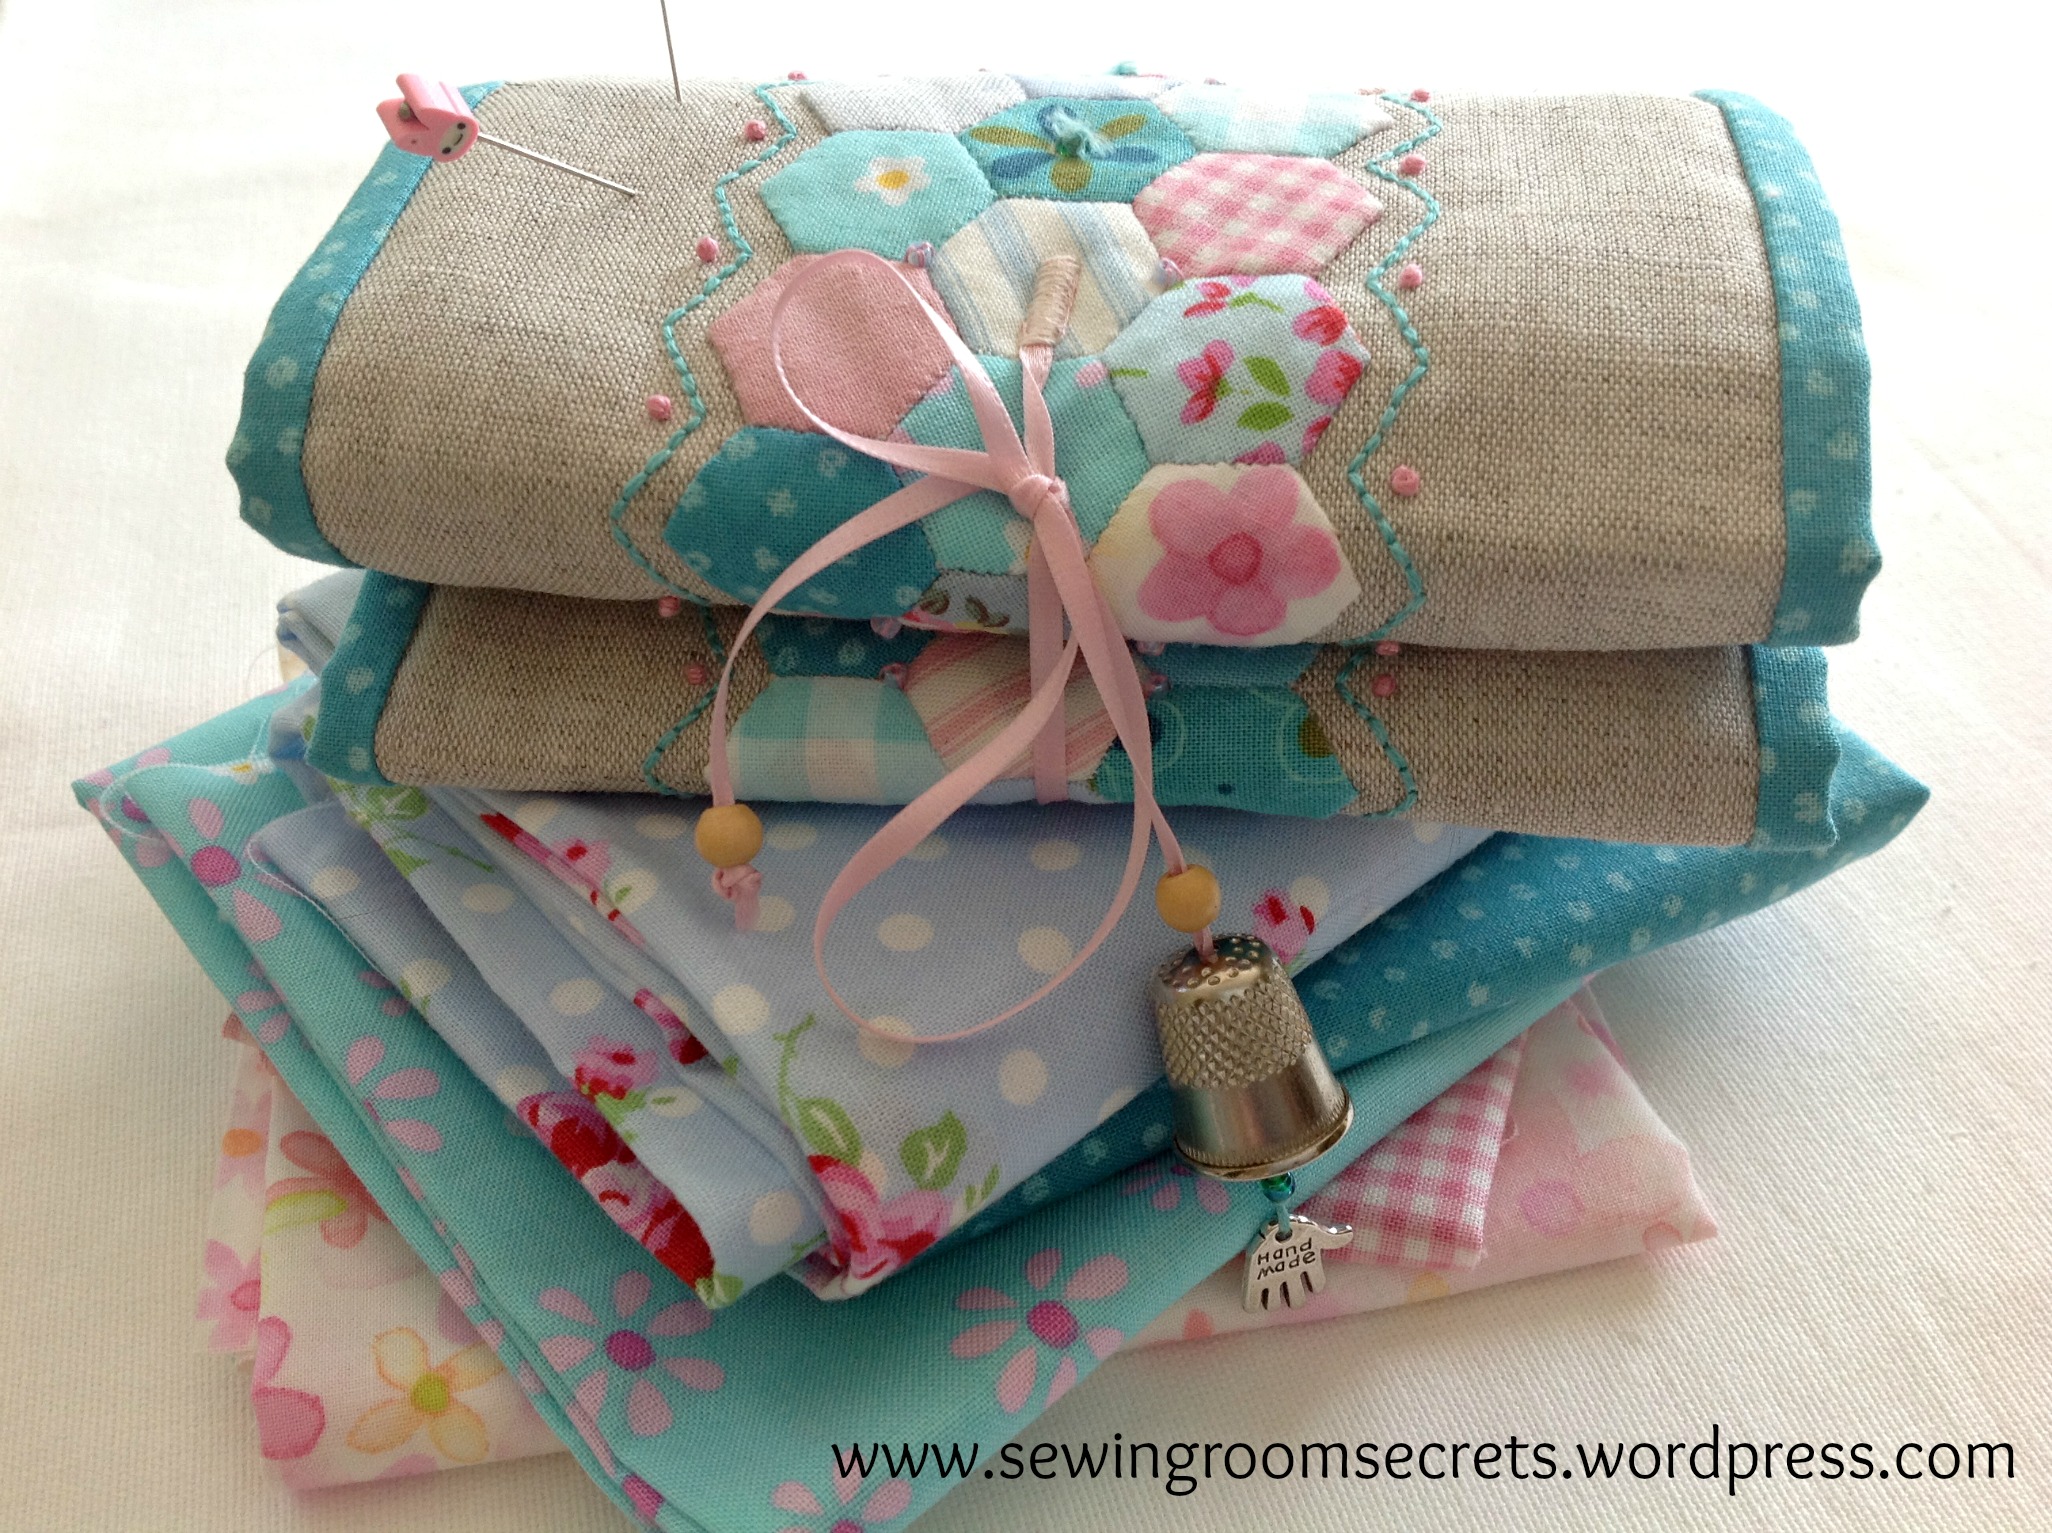 MessyJesse - a quilt blog by Jessie Fincham: Easy Fabric Box